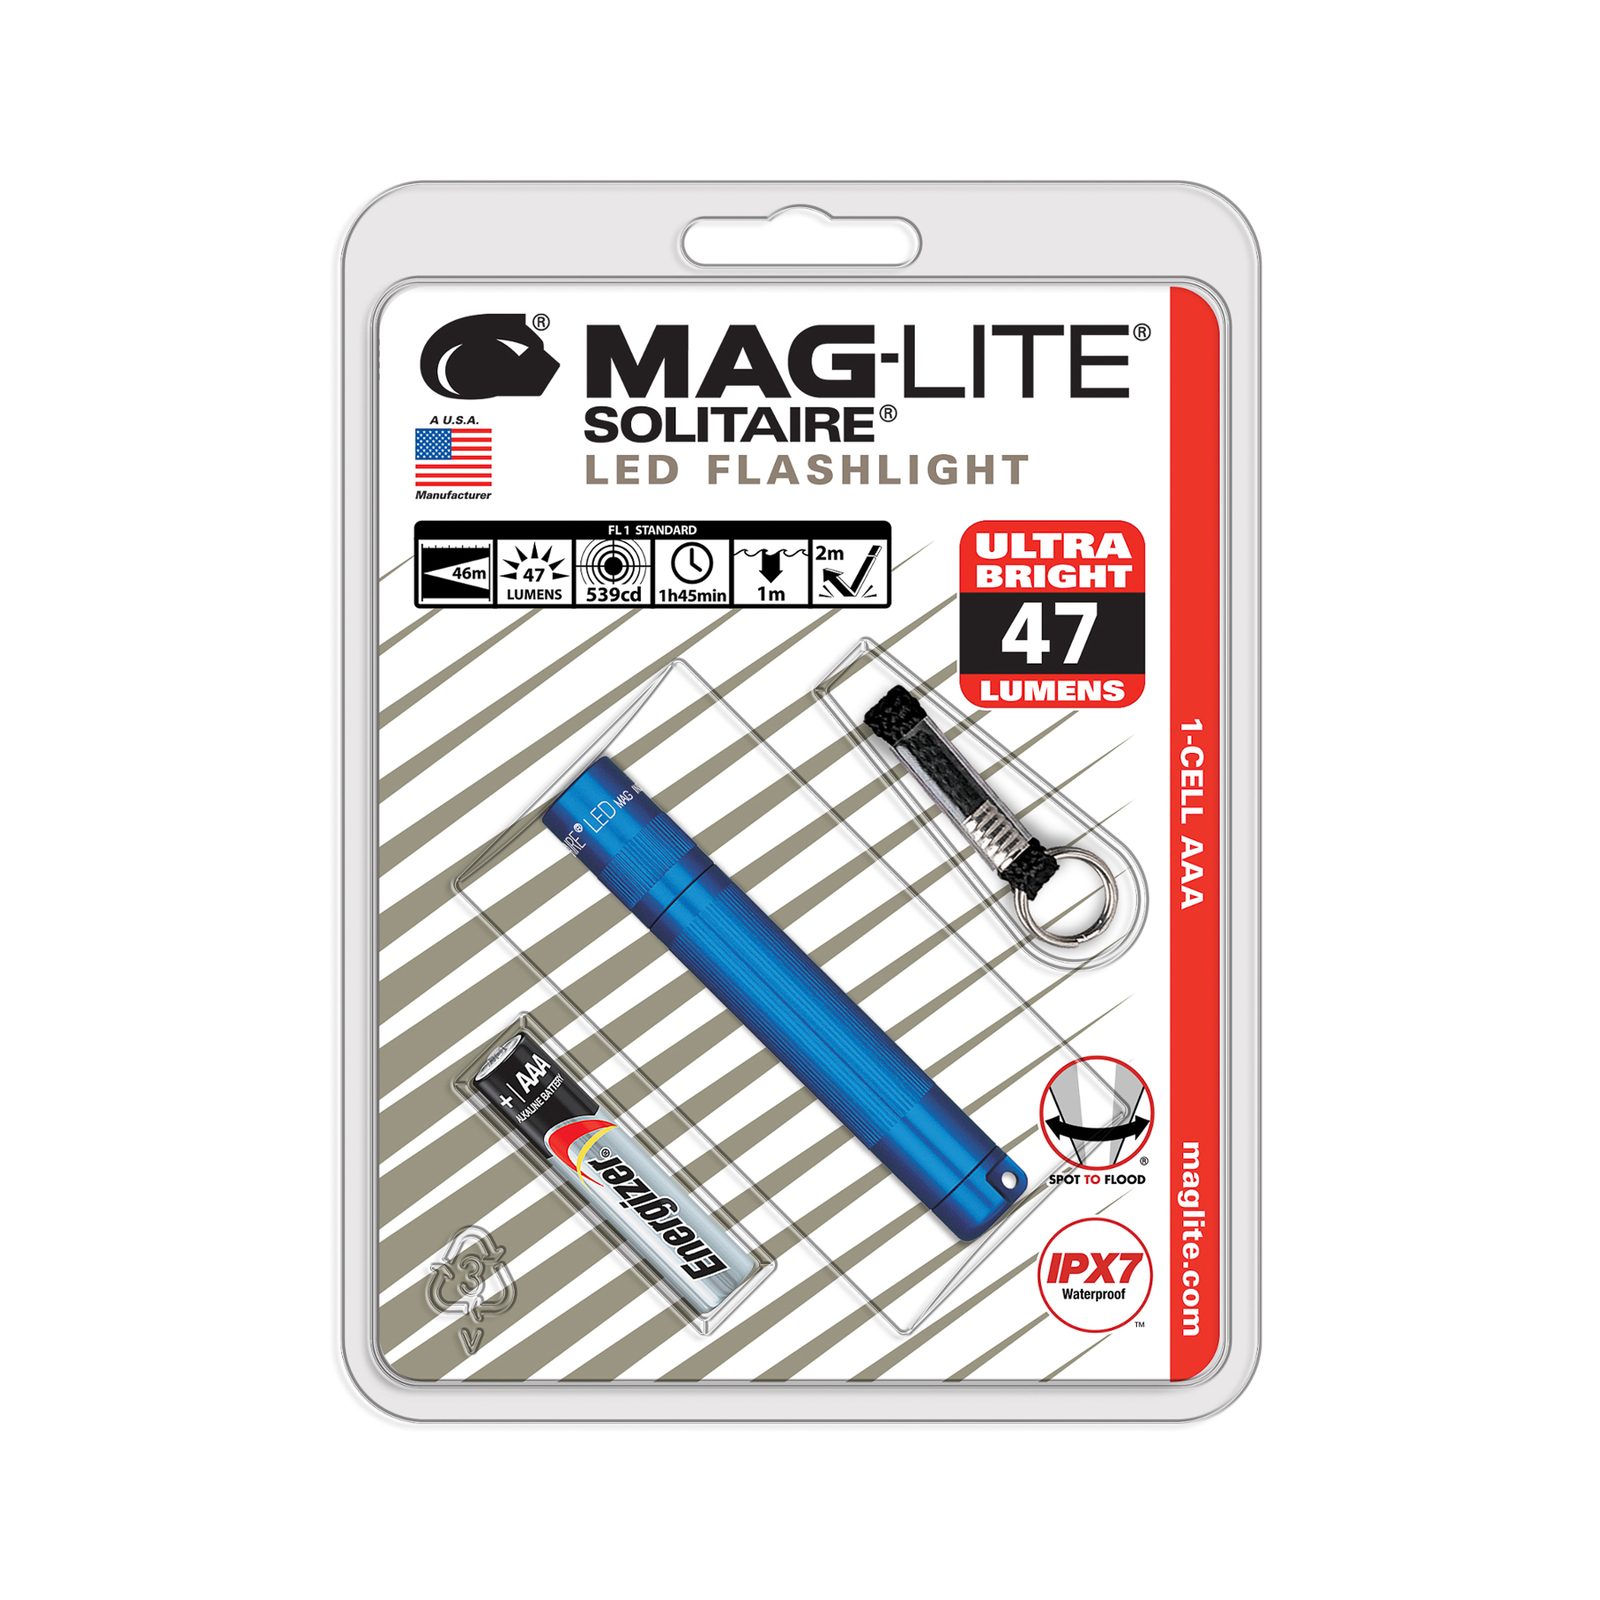 Maglite Solitaire LED torch, 1-Cell AAA, blue